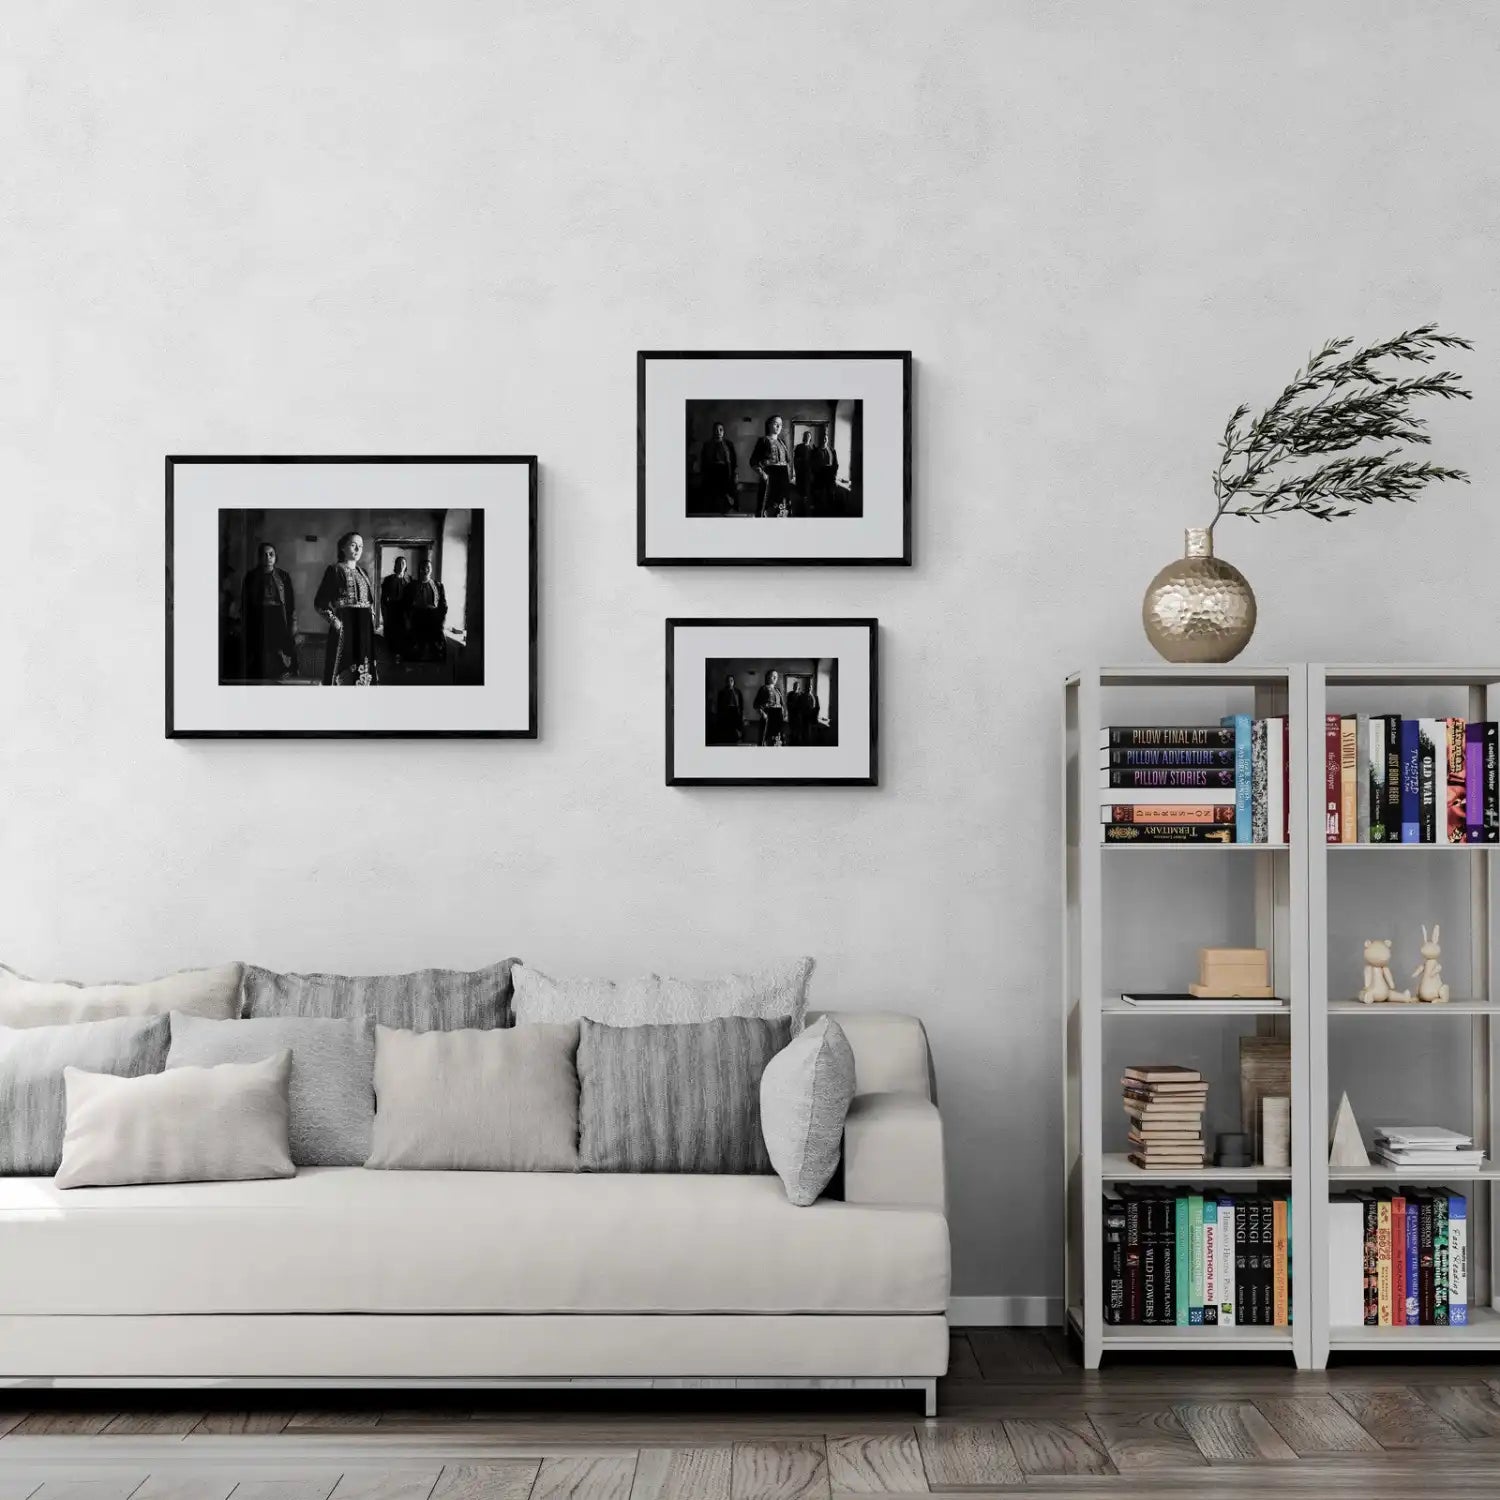 Filiates, Thesprotia, Epirus, Greece | Dresses in a House | Black-and-White Wall Art Photography - framing options